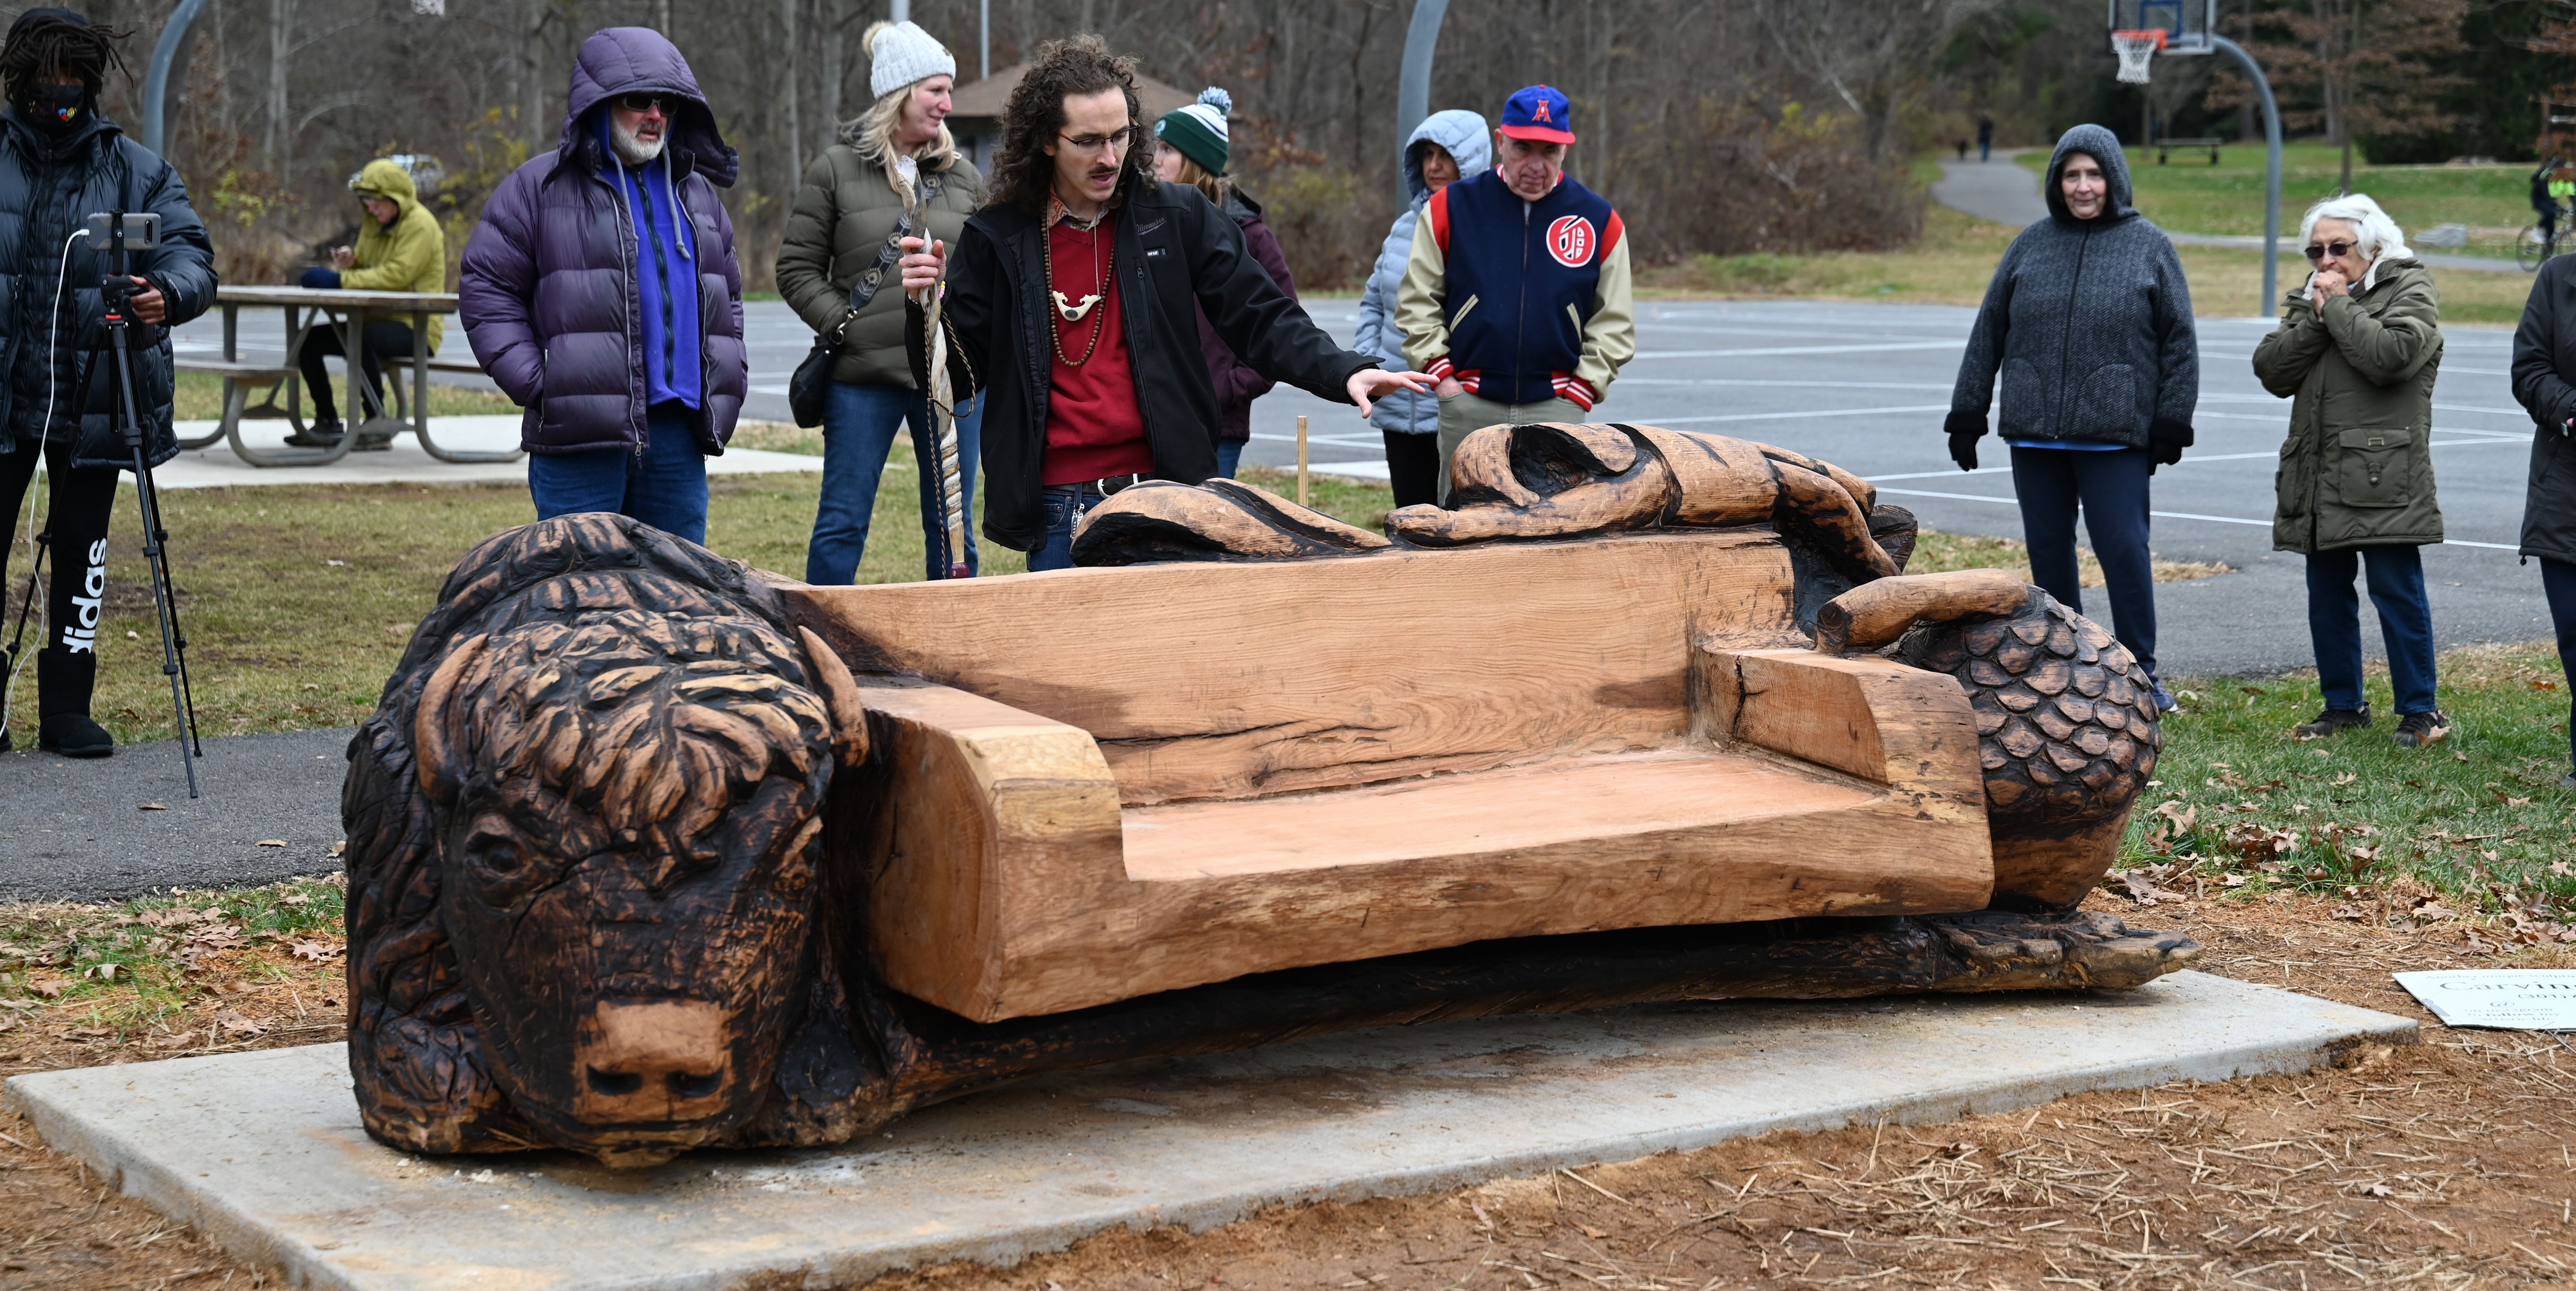 a 300-year-old tree was cut down in md. a wood sculptor transformed it.